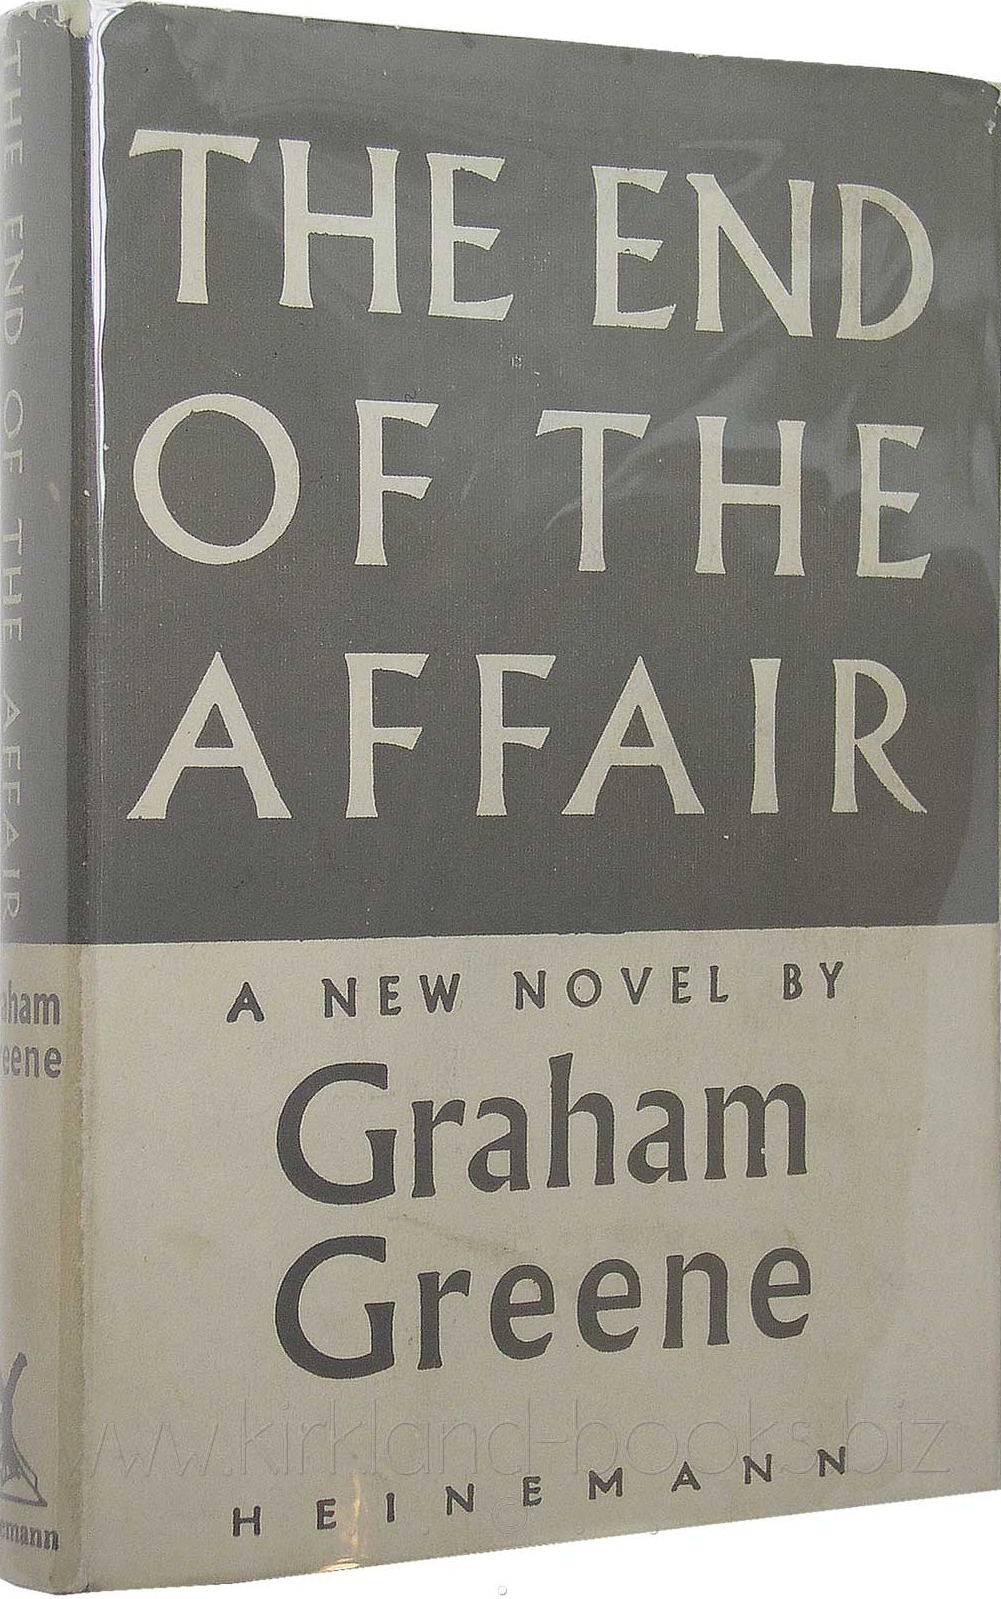 The end of the affair